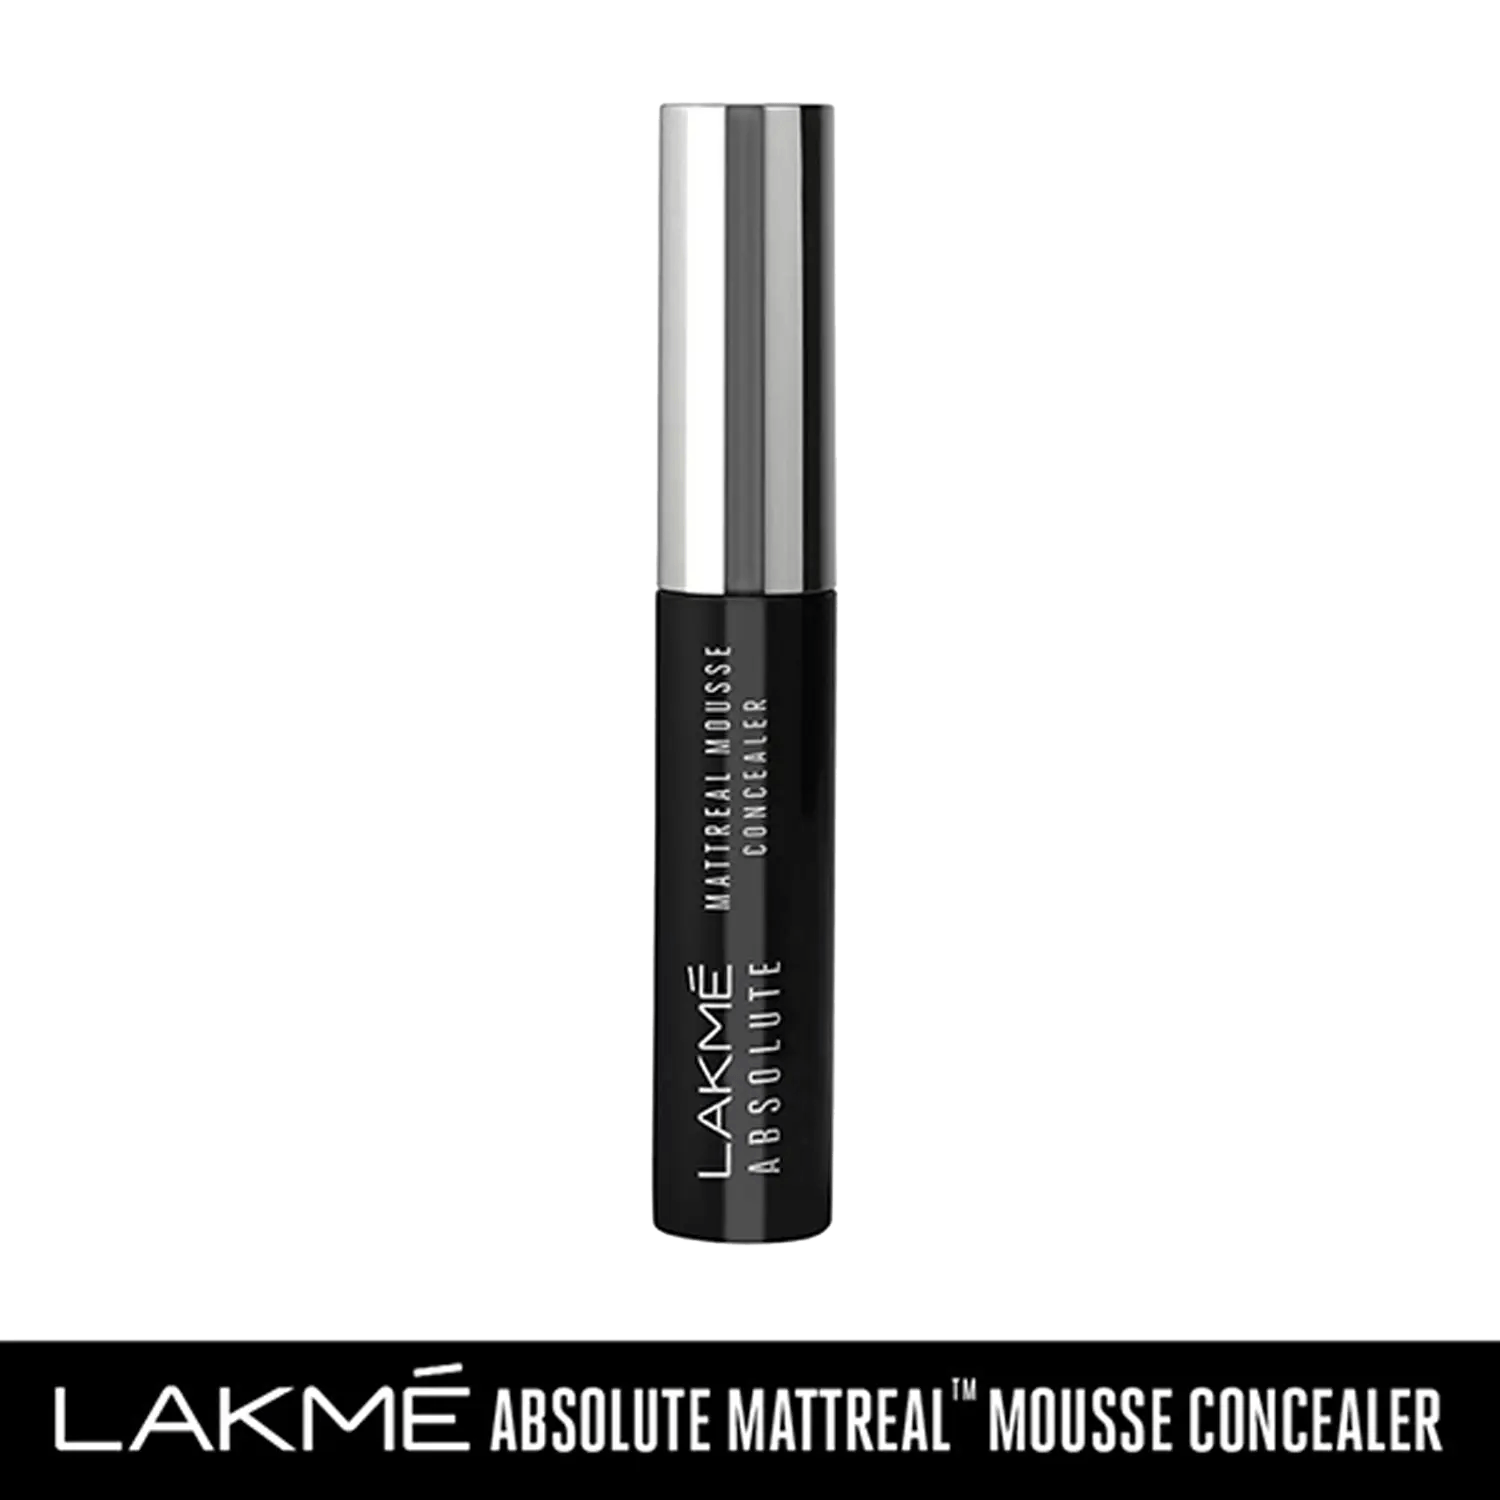 Lakme | Lakme Absolute Mattereal Mousse Concealer - 01 Sand (9g)